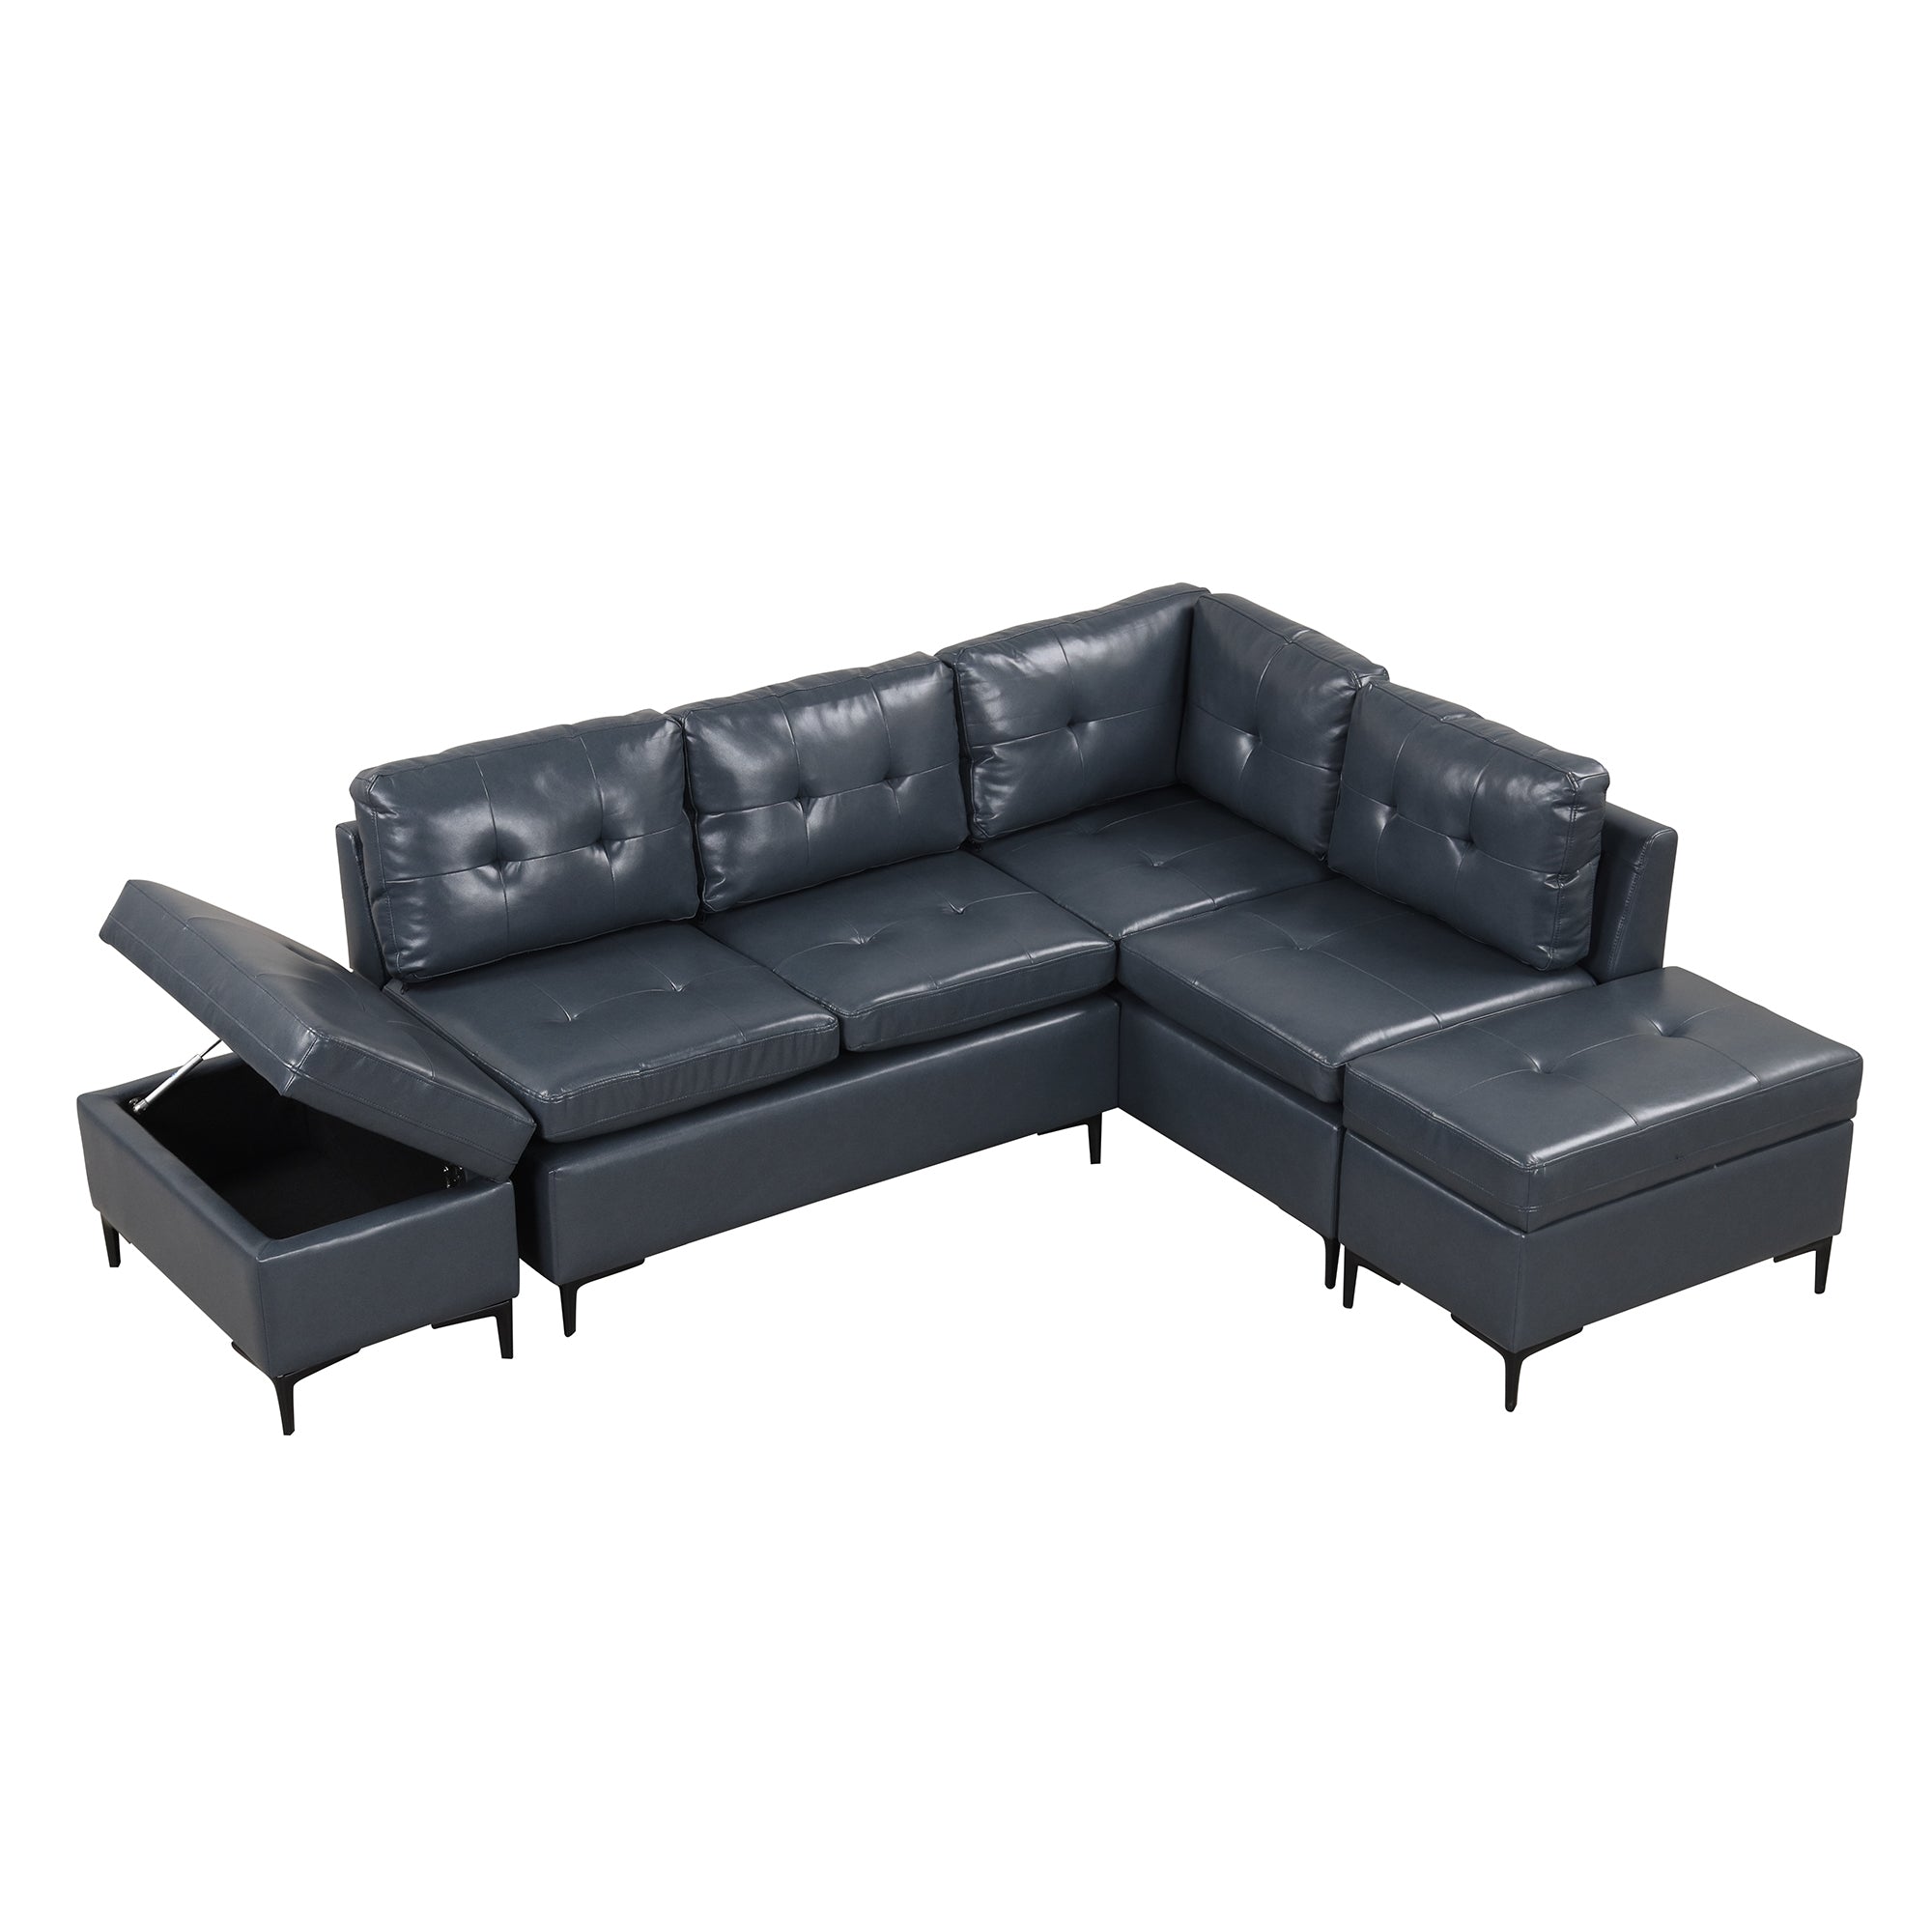 94.88" Dark Gray L-Shaped Sectional Sofa with Storage Ottomans, PU Leather Living Room Couch-Stationary Sectionals-American Furniture Outlet